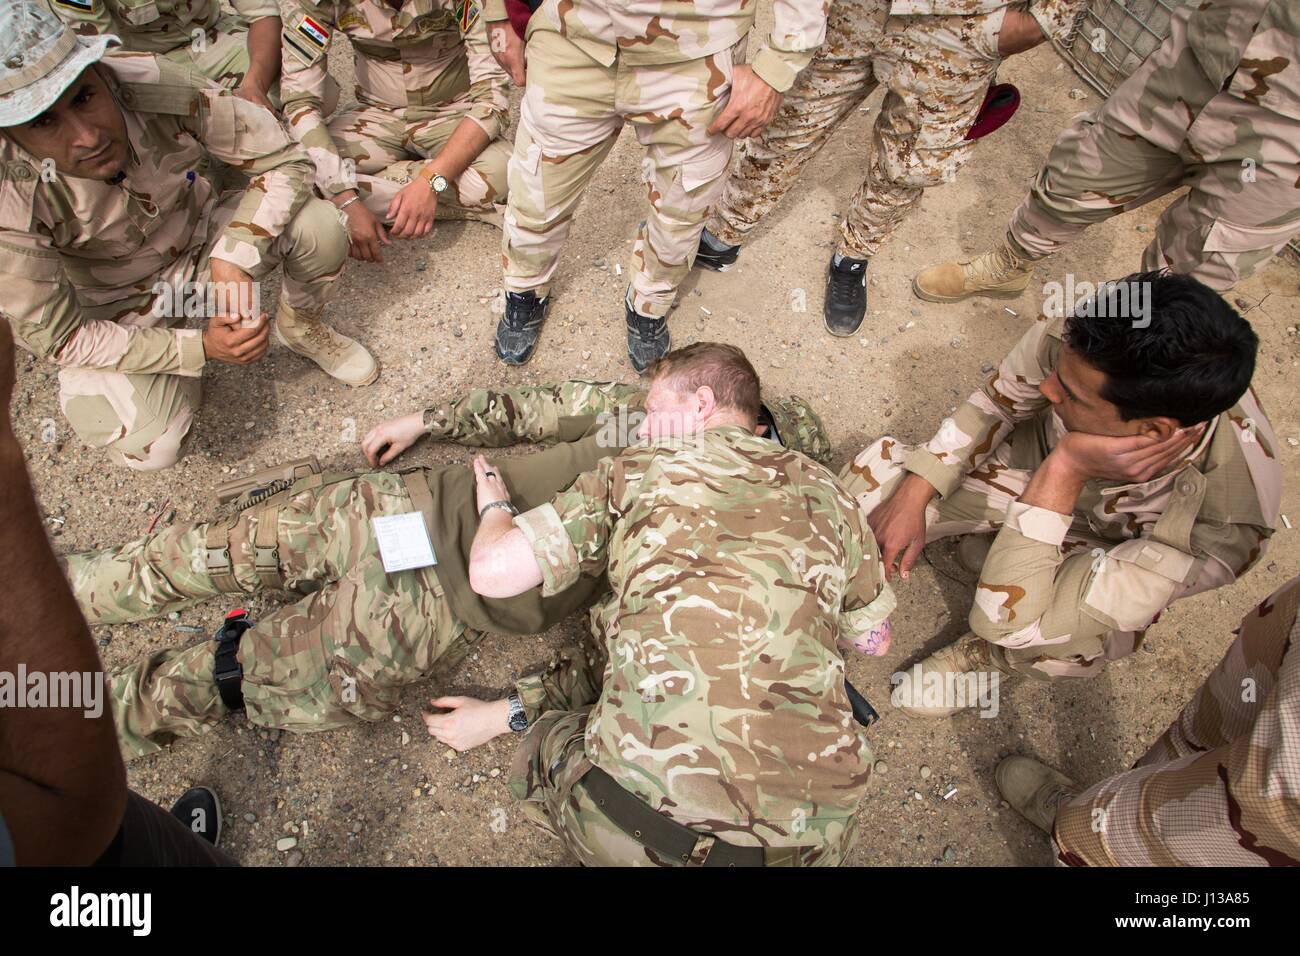 A British army medic deployed in support of Combined Joint Task Force – Operation Inherent Resolve and assigned to 2nd Battalion, Duke of Lancaster Regiment, shows how to check for breathing  on a simulated casualty during tactical field care training at Camp Taji, Iraq, April 12, 2017. This training is part of the overall Combined Joint Task Force – Operation Inherent Resolve building partner capacity mission by training and improving the capability of partnered forces fighting ISIS. CJTF-OIR is the global Coalition to defeat ISIS in Iraq and Syria.  (U.S. Army photo by Spc. Christopher Brech Stock Photo